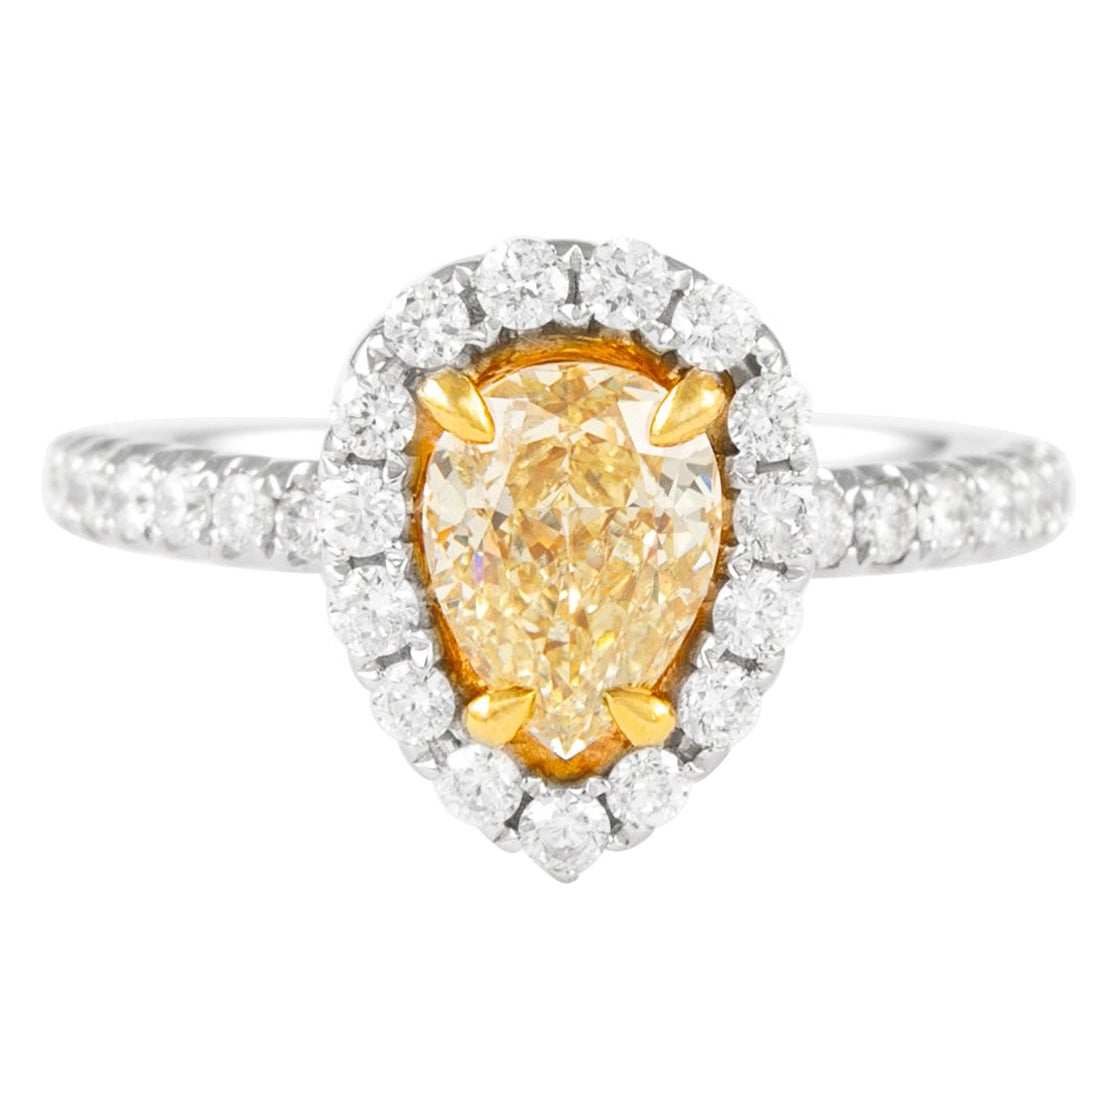 Alexander 1.08ct Fancy Intense Yellow Pear Diamond with Halo Ring 18k For Sale